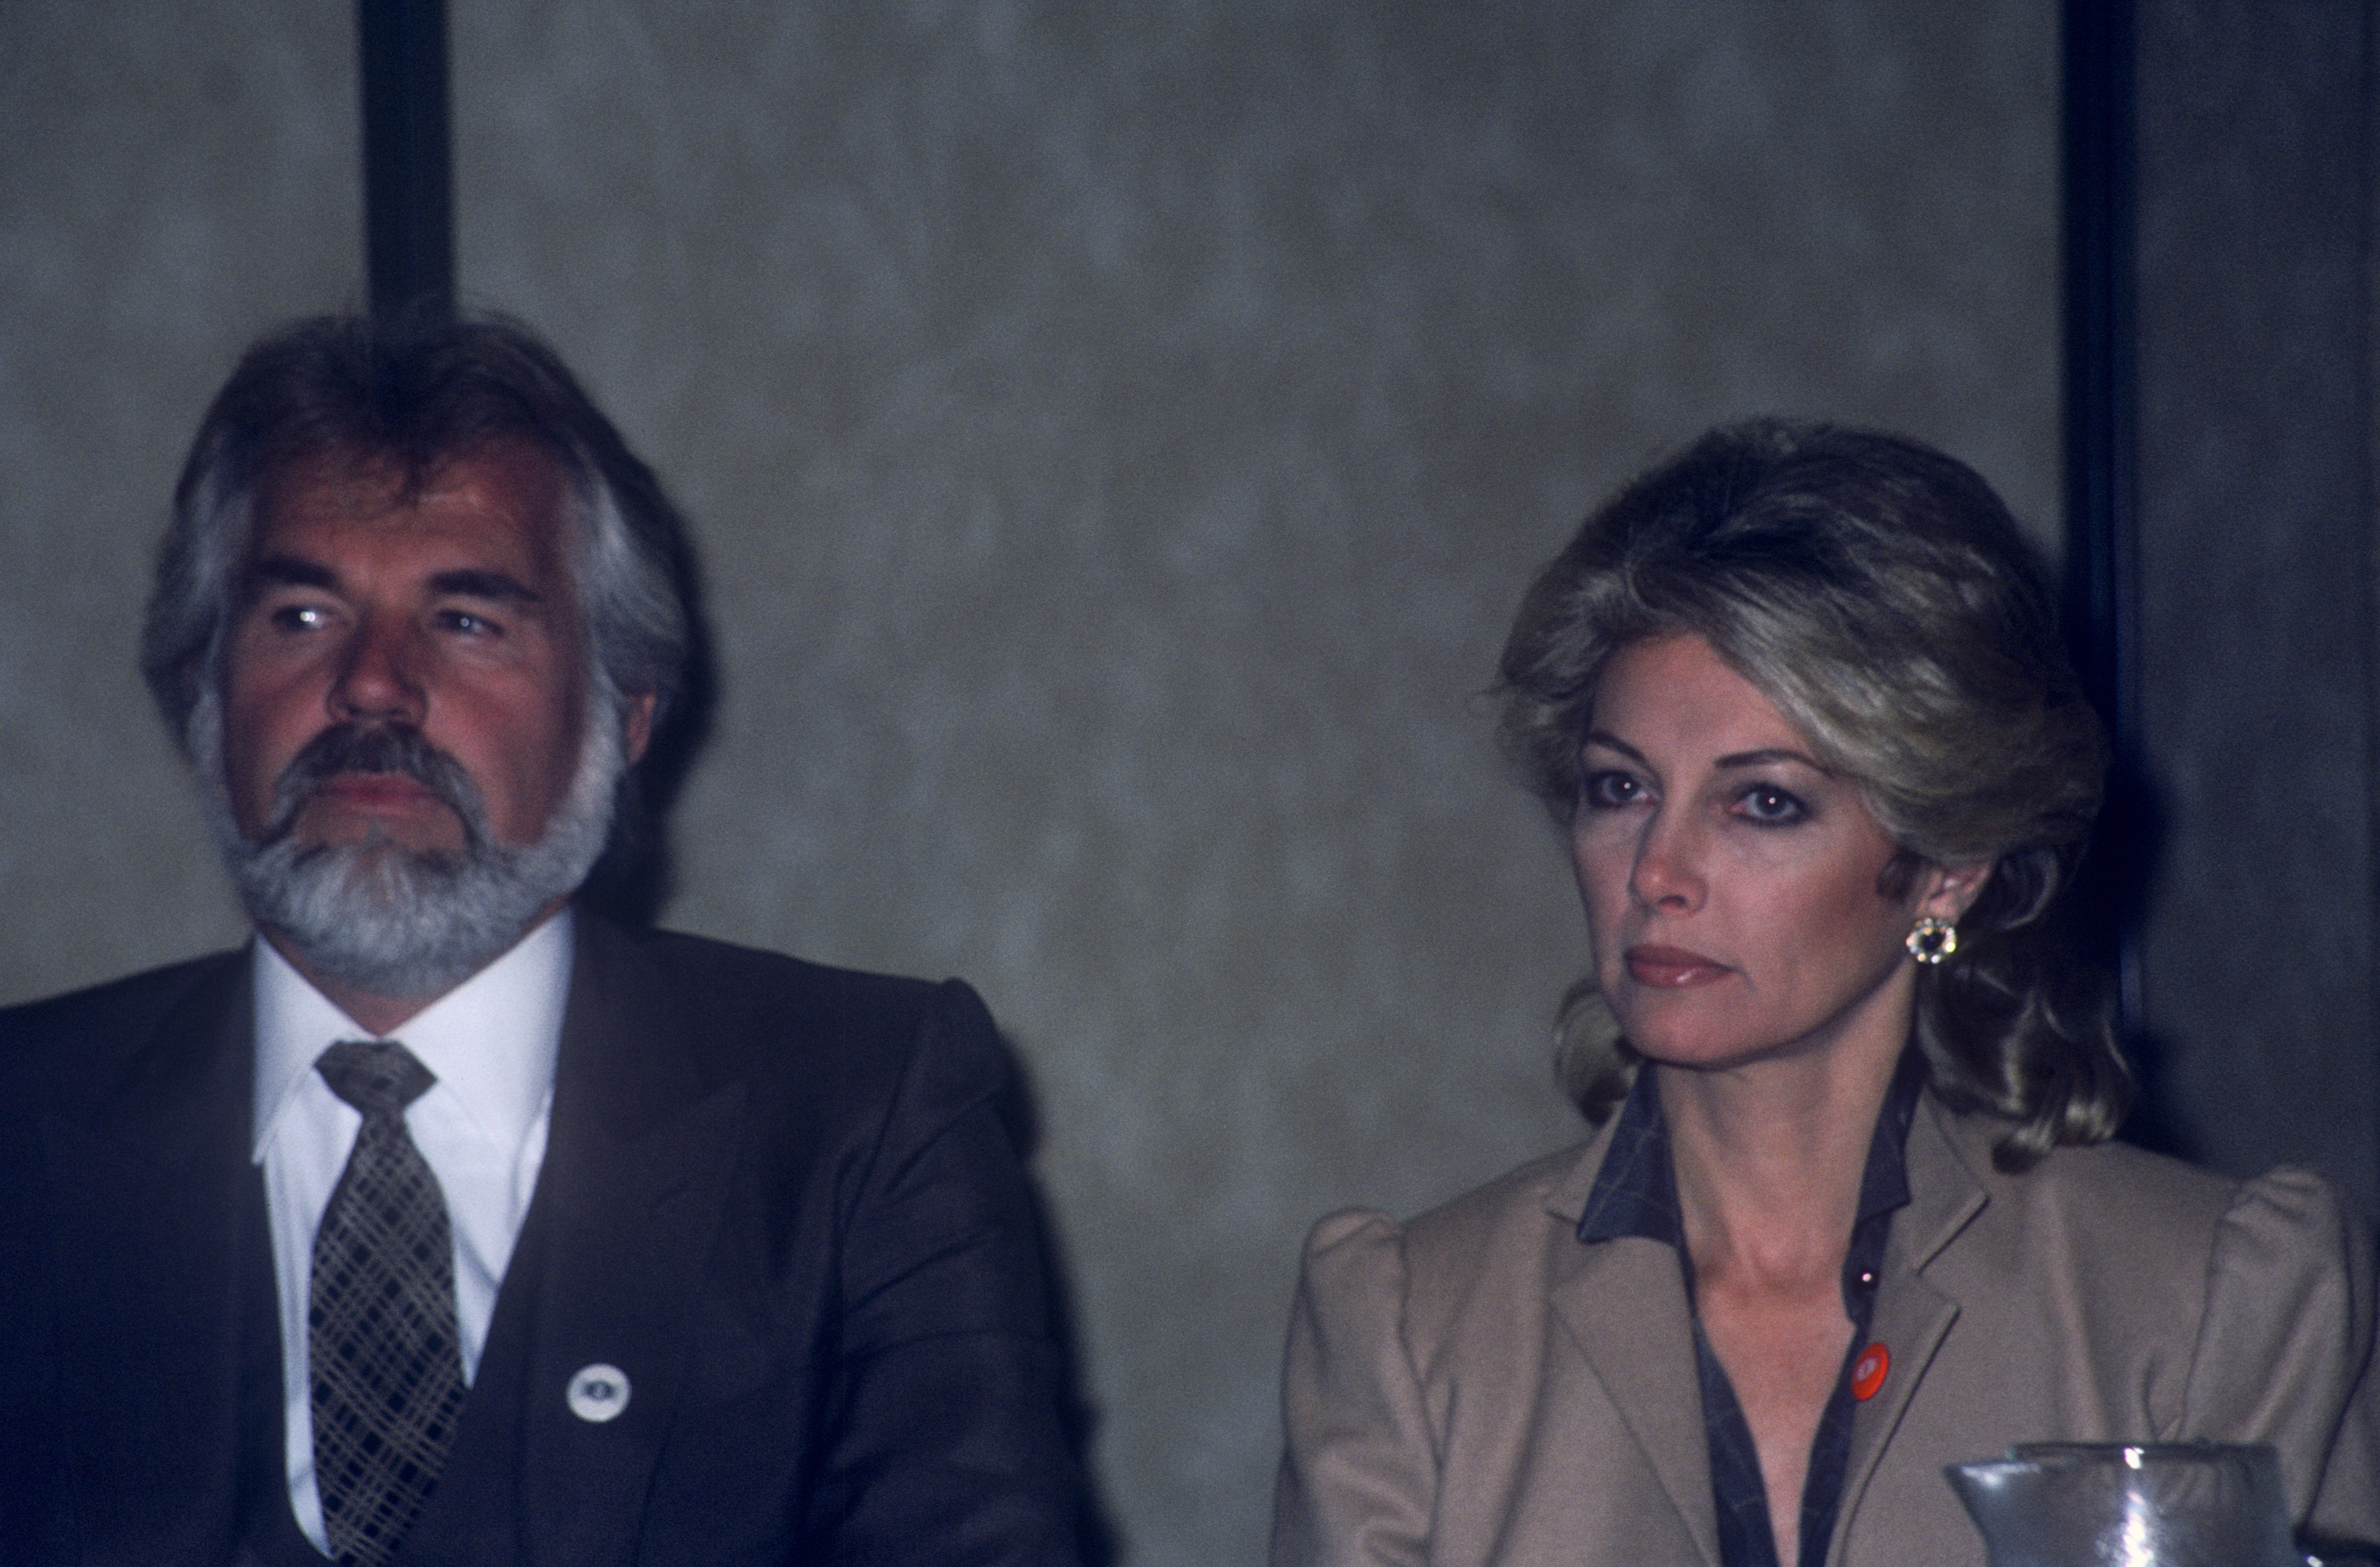 Kenny Rogers with is wife Marianne Gordon at the The Worked Hunger Media Awards in 1982. / Source: Getty Images